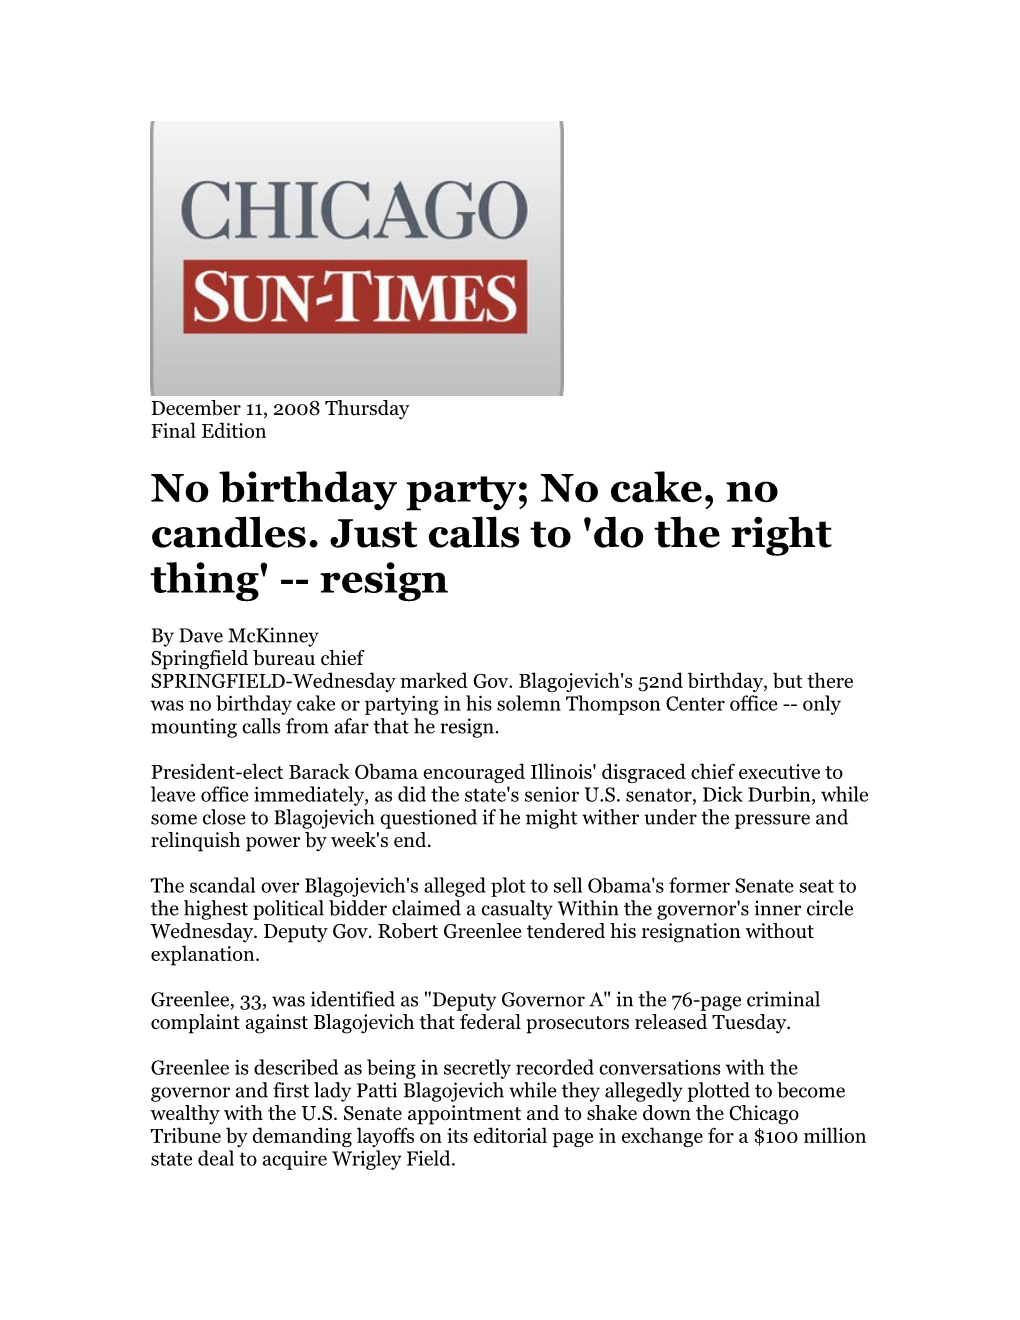 No Birthday Party; No Cake, No Candles. Just Calls to 'Do the Right Thing' Resign